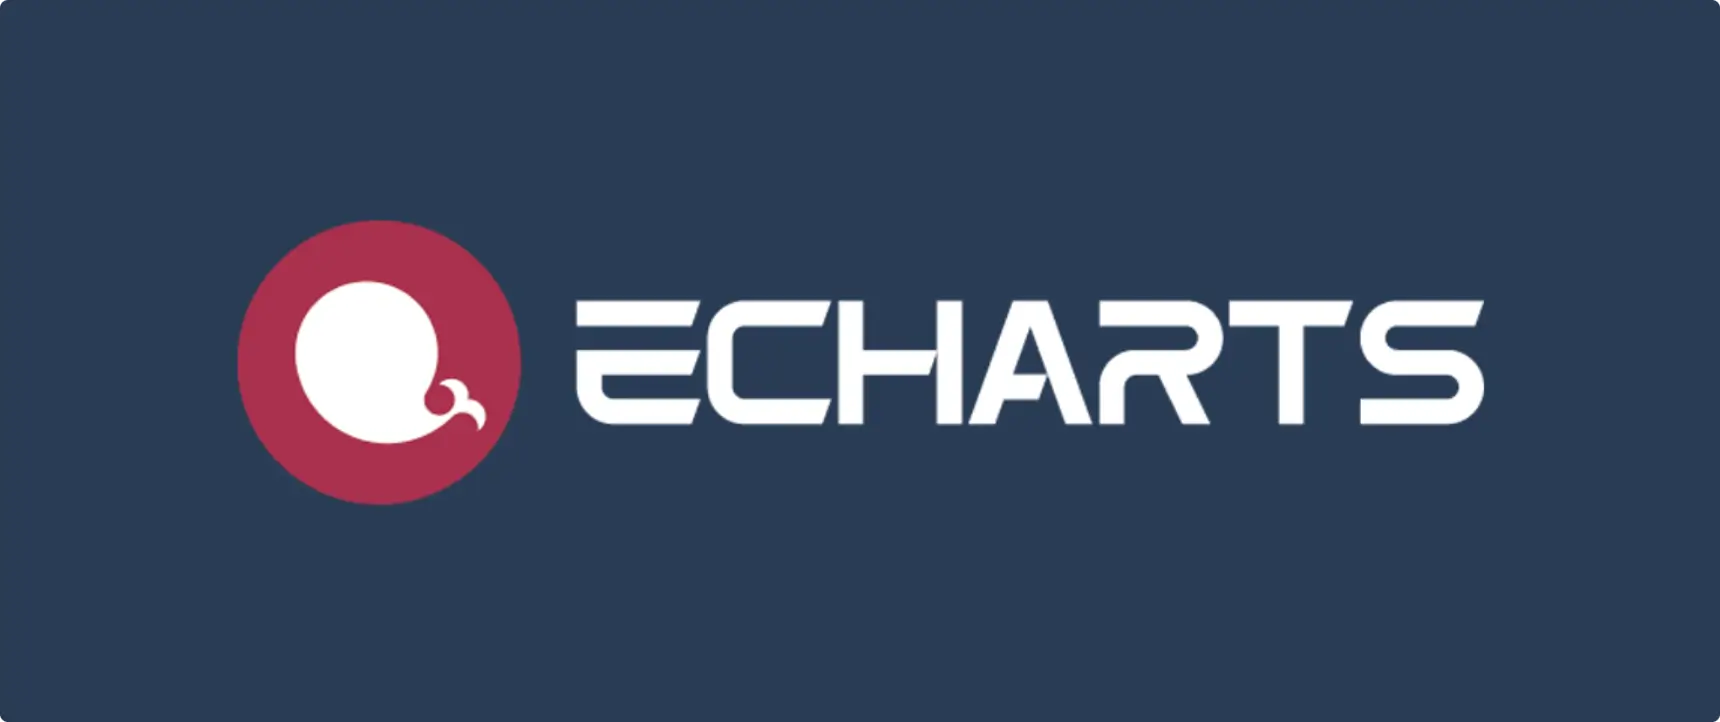 Extended Shortcode - echarts